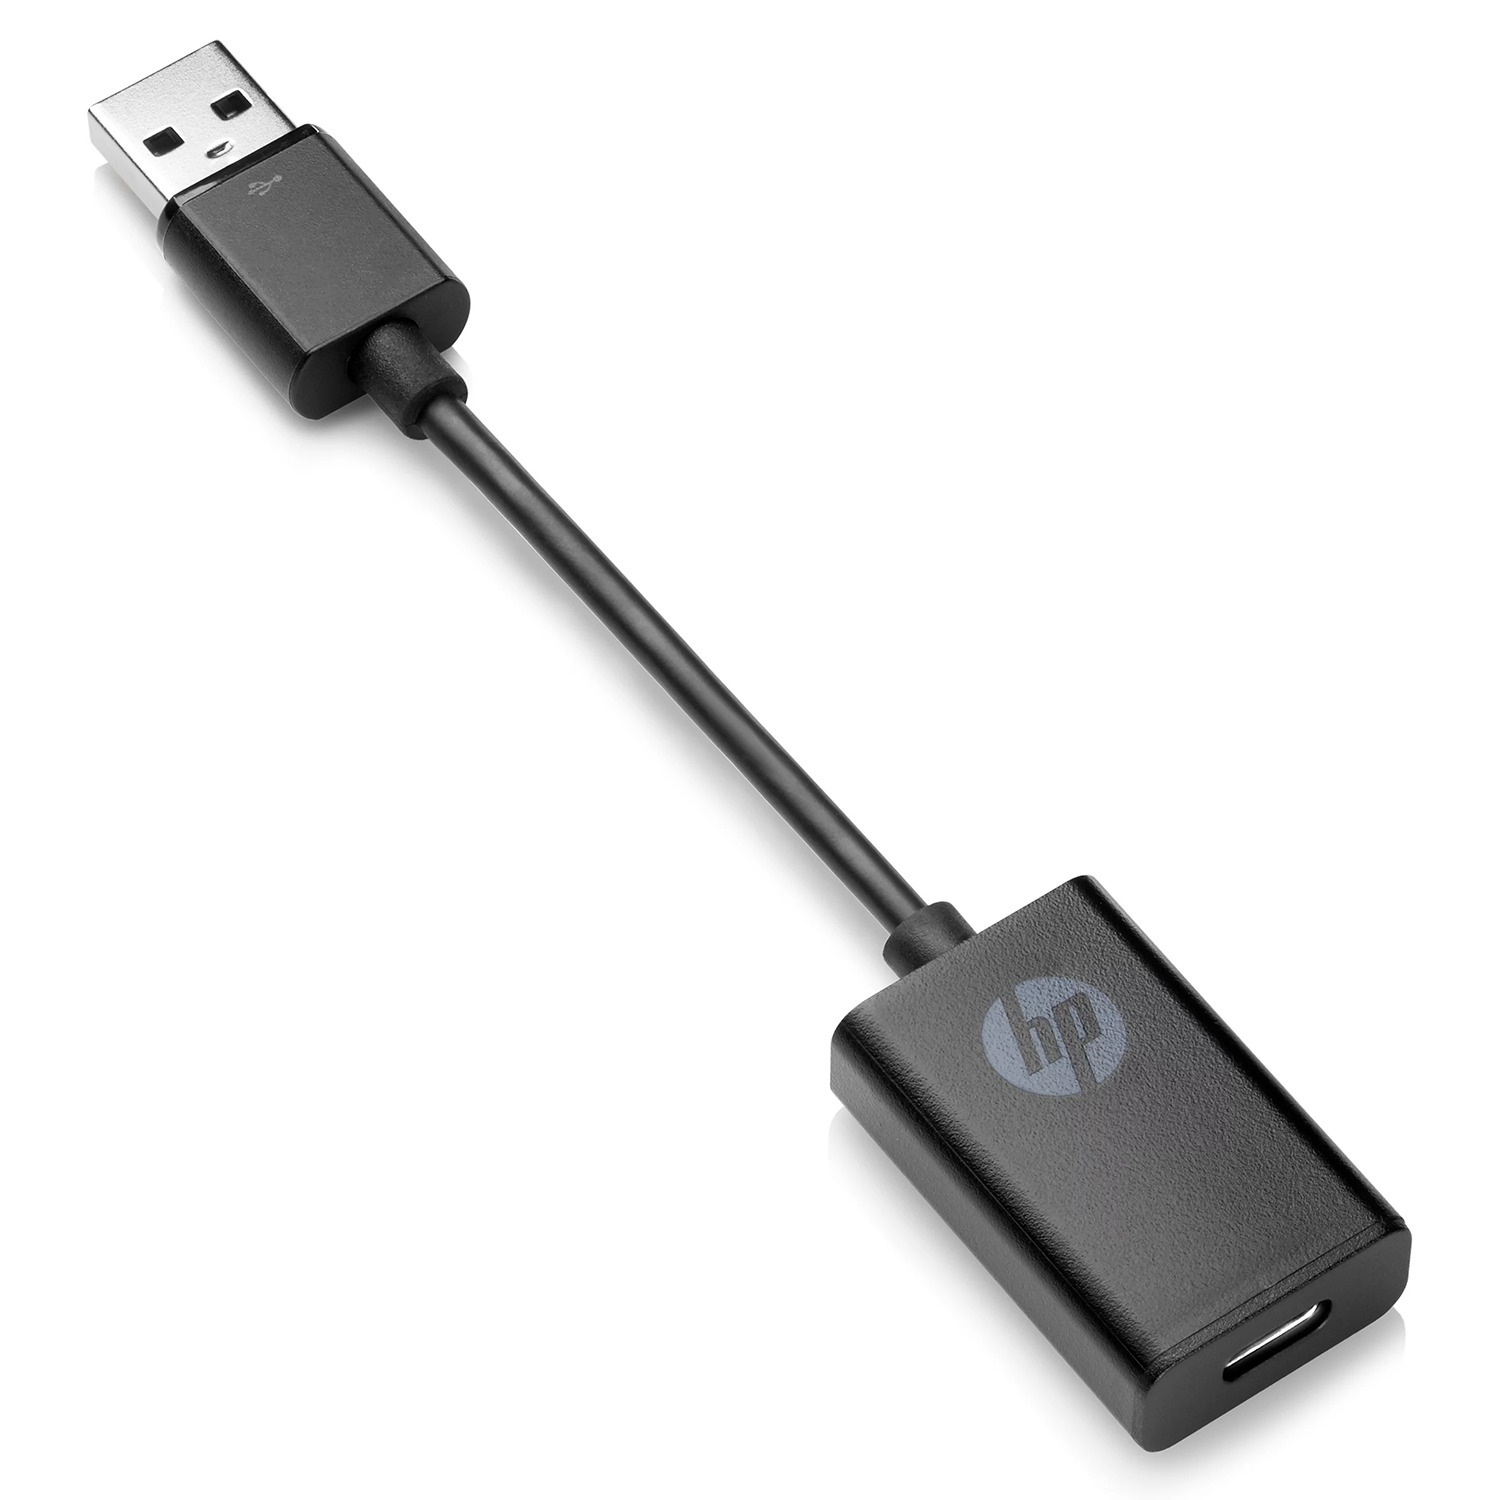 Genuine HP USB Type-A to USB Type-C Adapter Dongle for HP EliteBook ProBook Dock